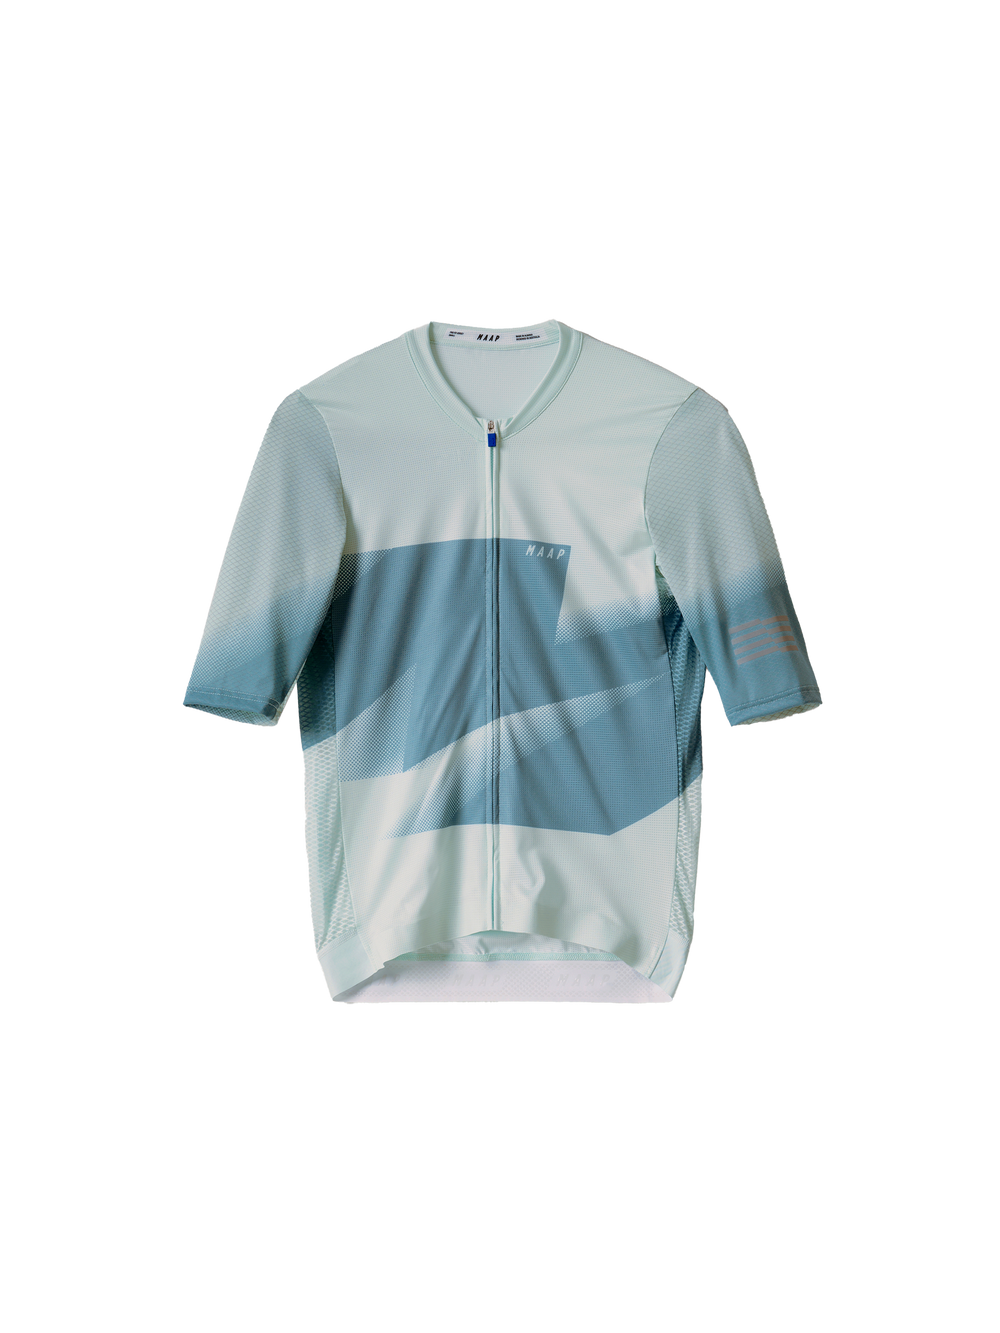 Product Image for Evolve Pro Air Jersey 2.0